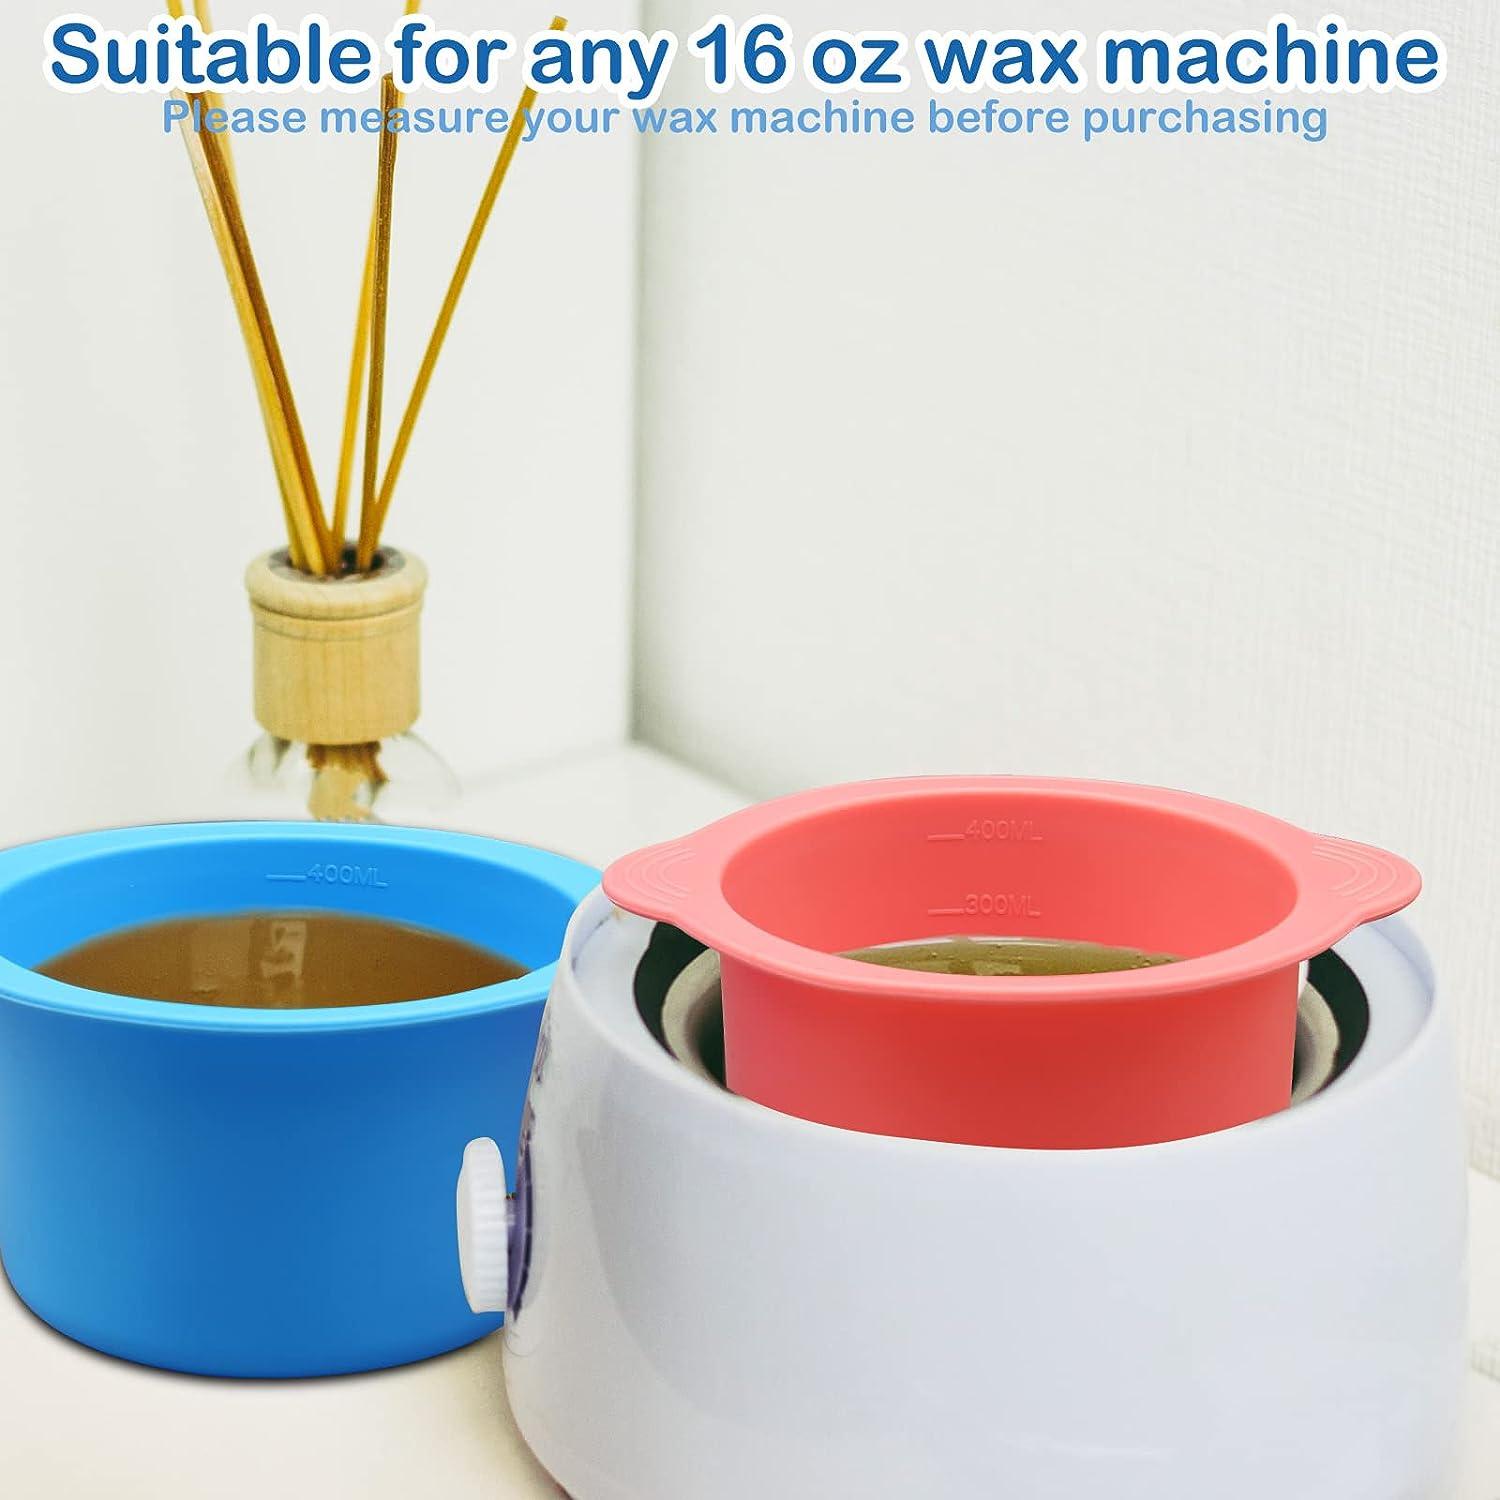 2 Pcs Silicone Wax Warmer Liner, Silicone Wax Bowl for Wax Warmer, Reuse  Wax Melt Warmer Wax Pot Replacement, Non-Stick Wax Melt Liner with 2 Pcs  Wax Spatula Sticks for Hair Removal (